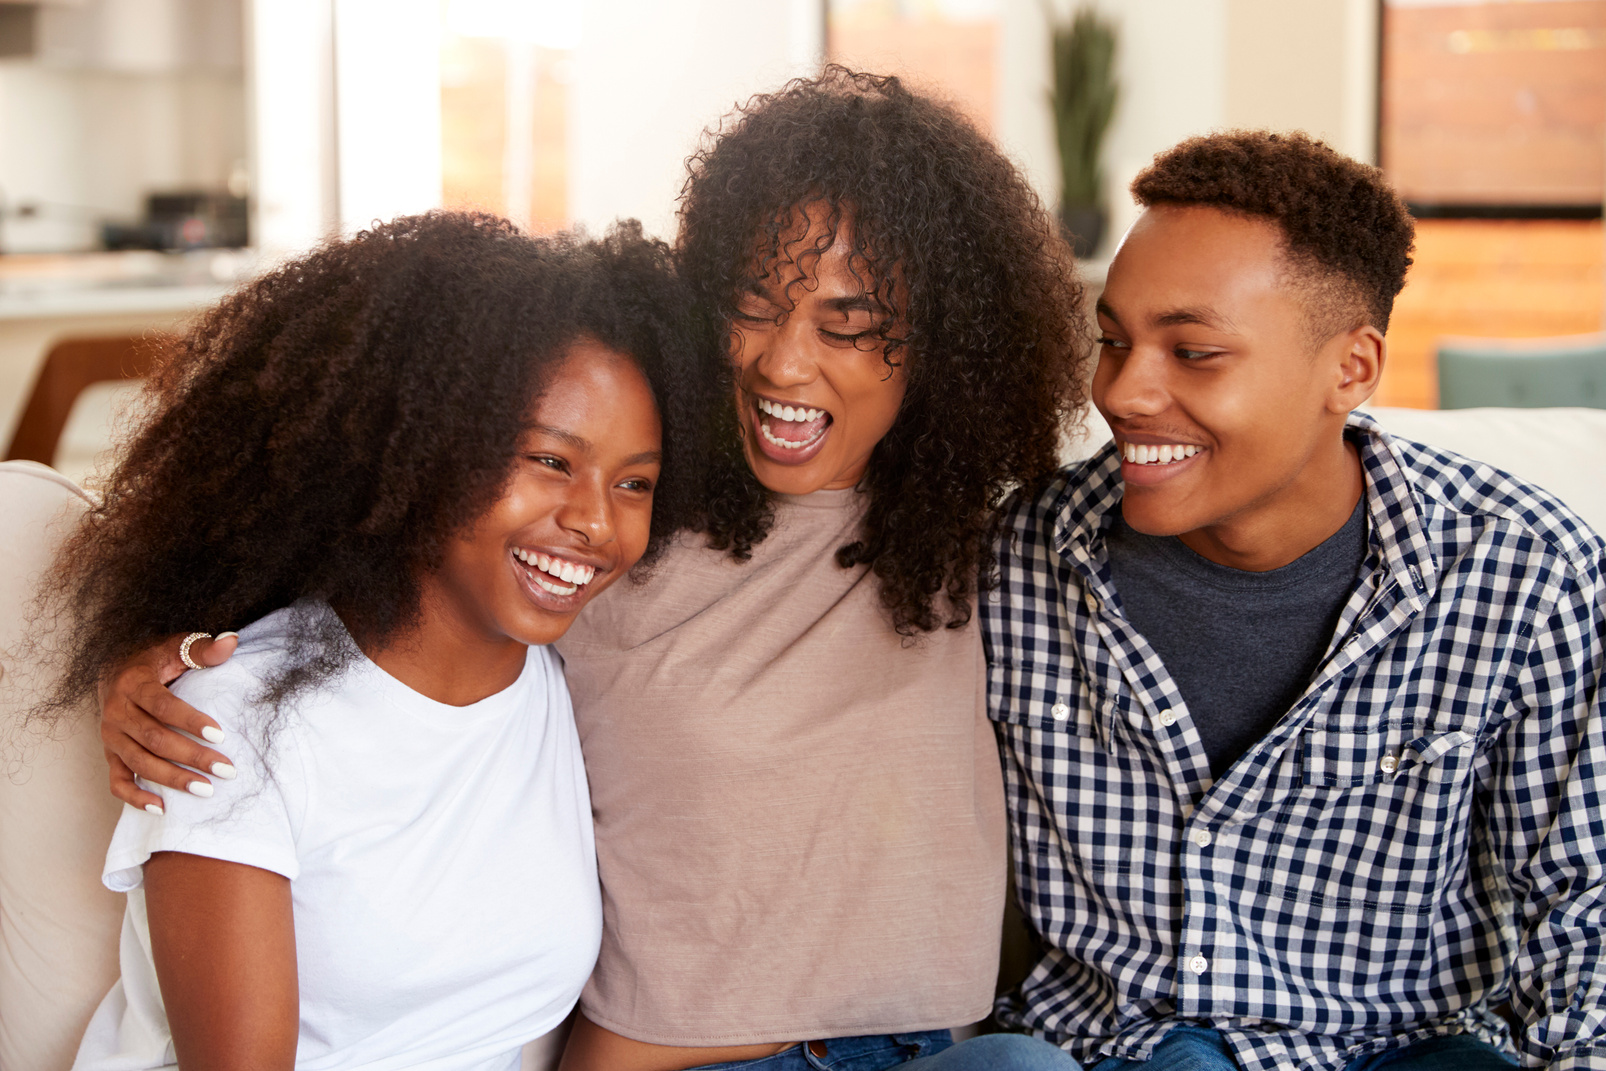 Black Teen and Young Adult Brother and Sisters Relaxing Together